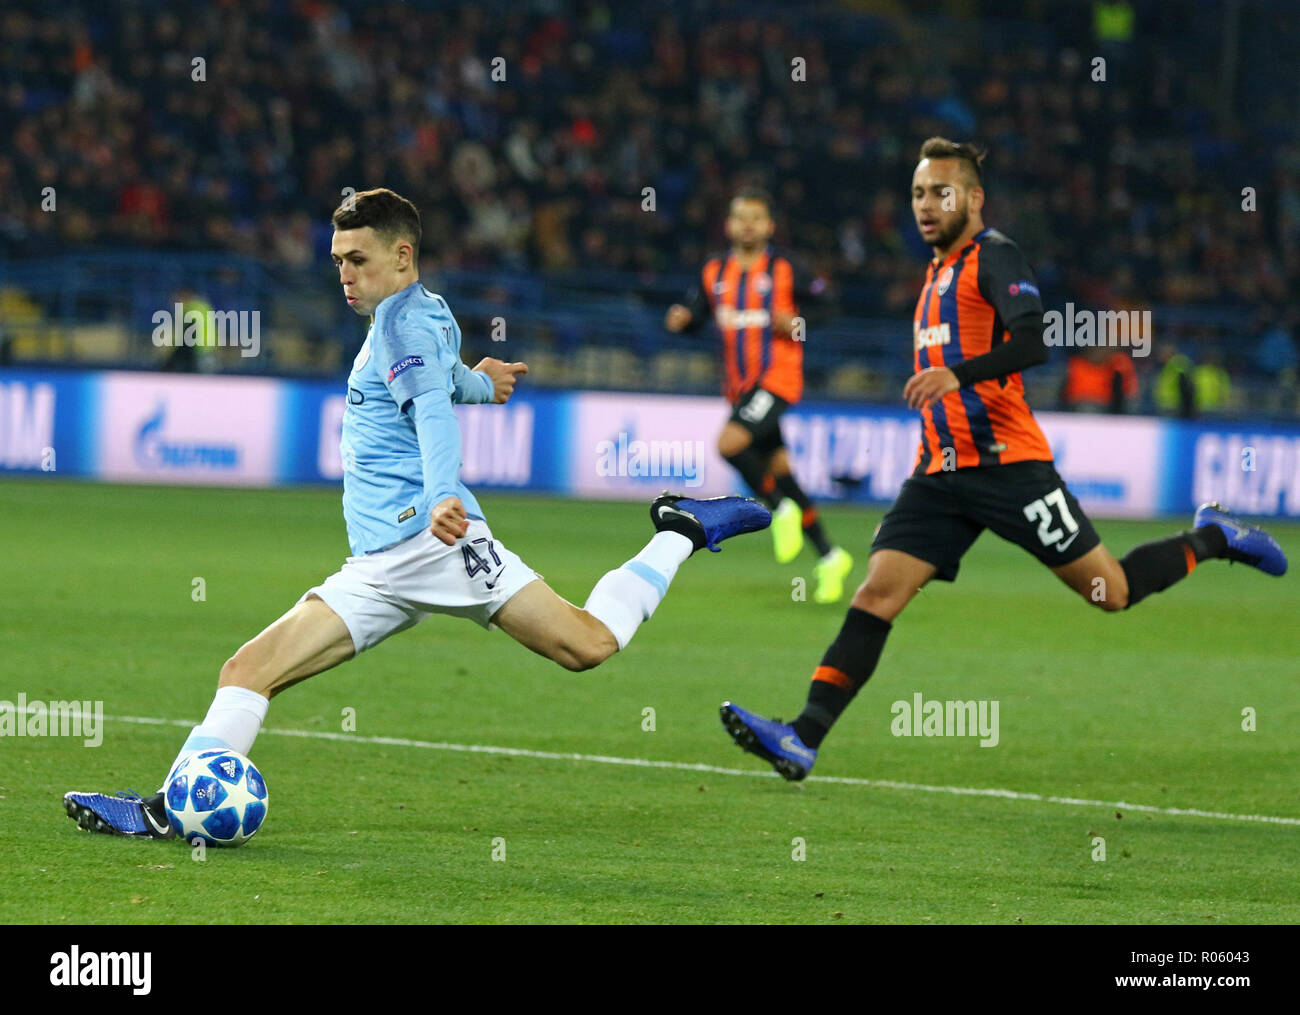 KHARKIV, UKRAINE - OCTOBER 23, 2018: Phil Foden of Manchester City (#47) kicks a ball during the UEFA Champions League game against Shakhtar Donetsk a Stock Photo